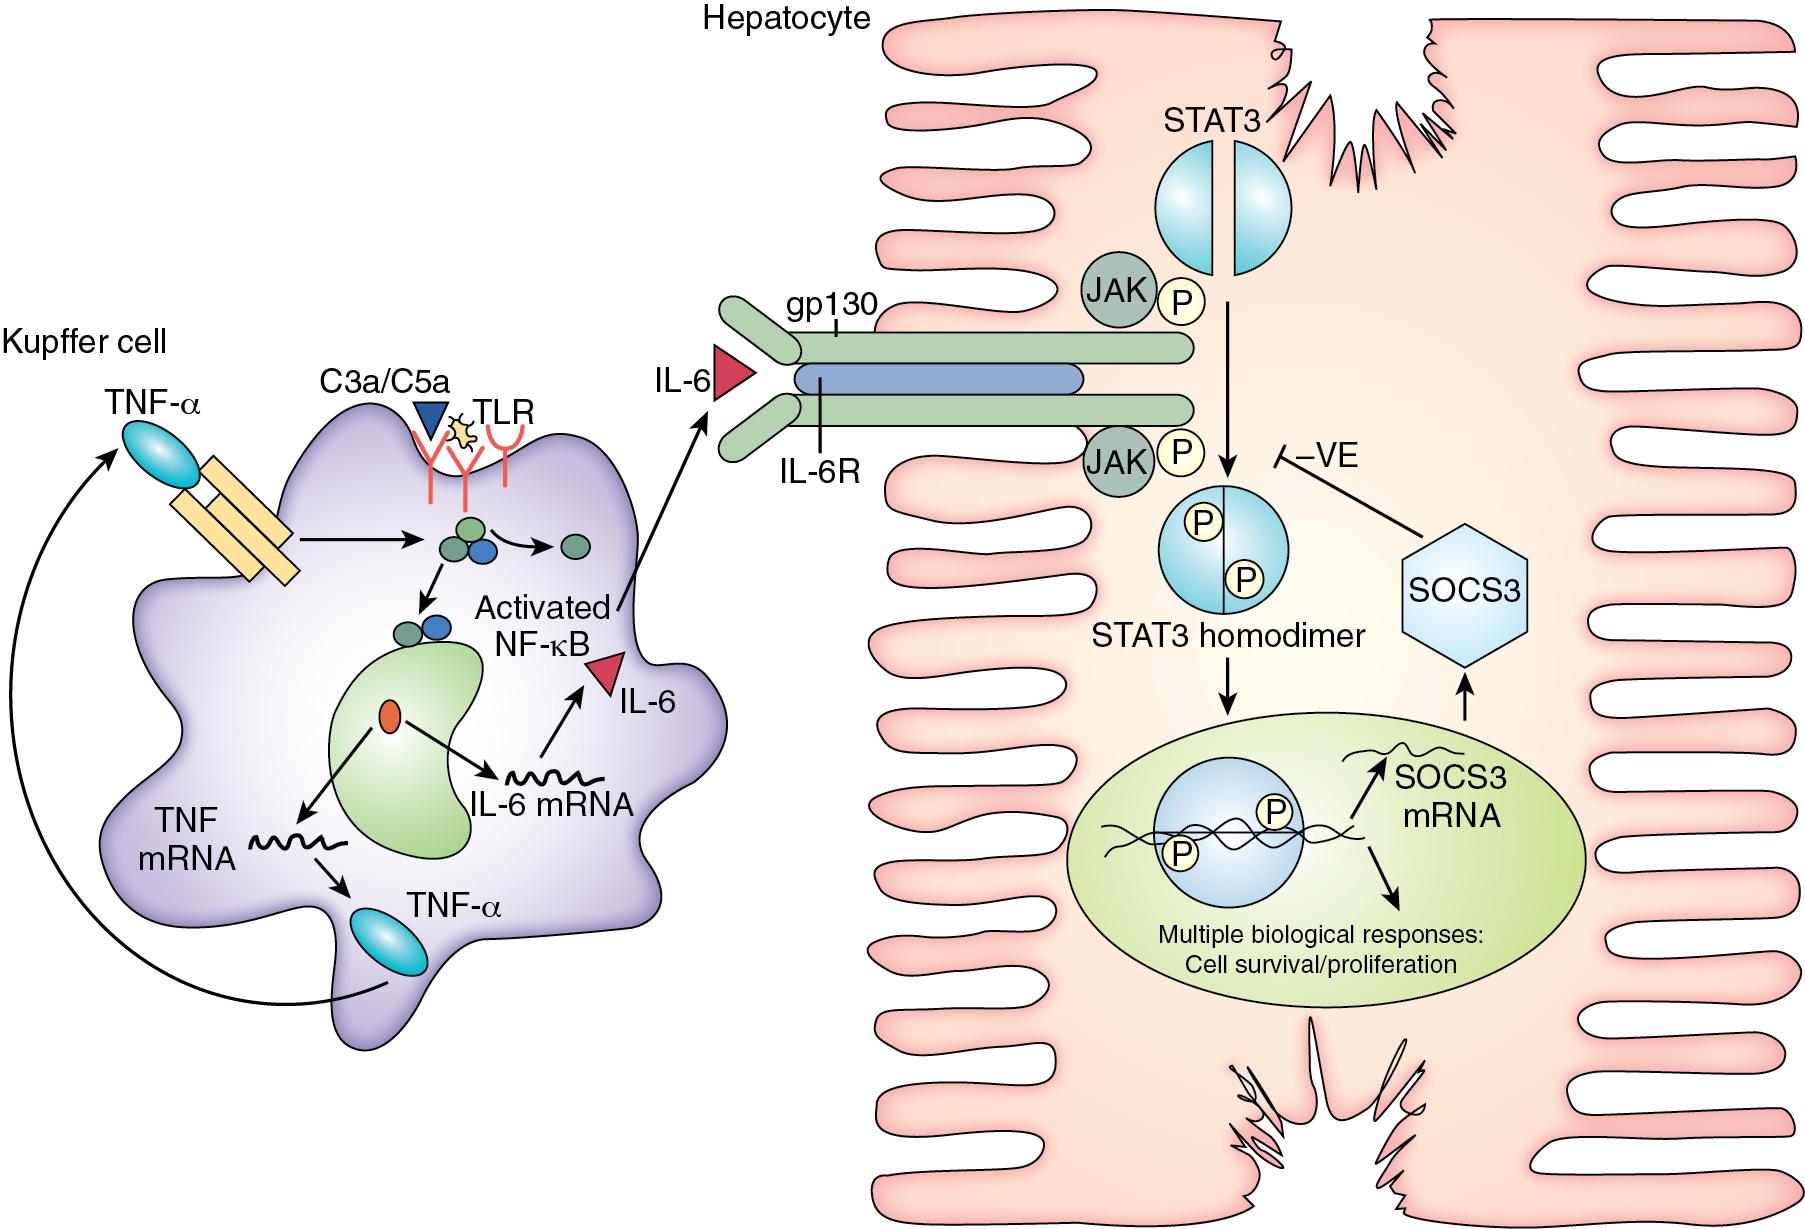 FIGURE 6.2, Stimulated by components of the innate immune system, Kupffer cells produce and secrete interleukin (IL)-6 and tumor necrosis factor (TNF)-α to kick-start the regenerative response. IL-6 helps stimulate hepatocyte proliferation via signal transducer and activator of transcription 3 (STAT3) activation; in turn, this response is negatively regulated by suppression of cytokine signaling-3 (SOCS3).